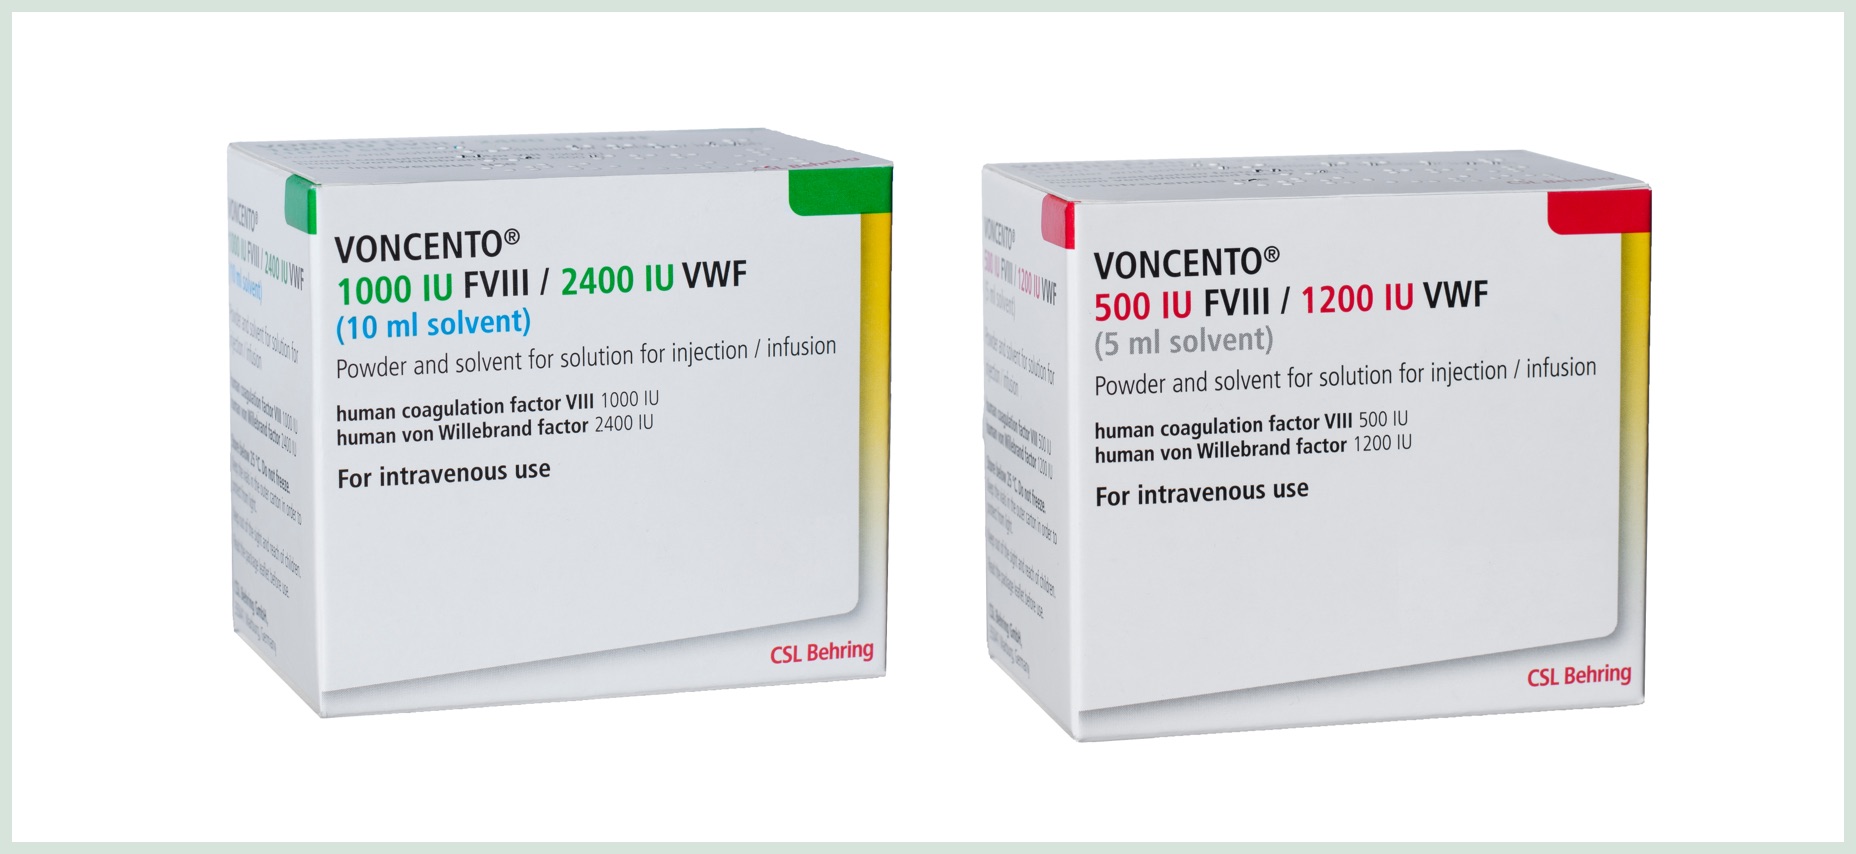 Image of Voncento packaging, two boxes side by side, 1000 IU FVIII / 2400 IU VWF in green, 500 IU FVIII / 1200 IU VWF in red